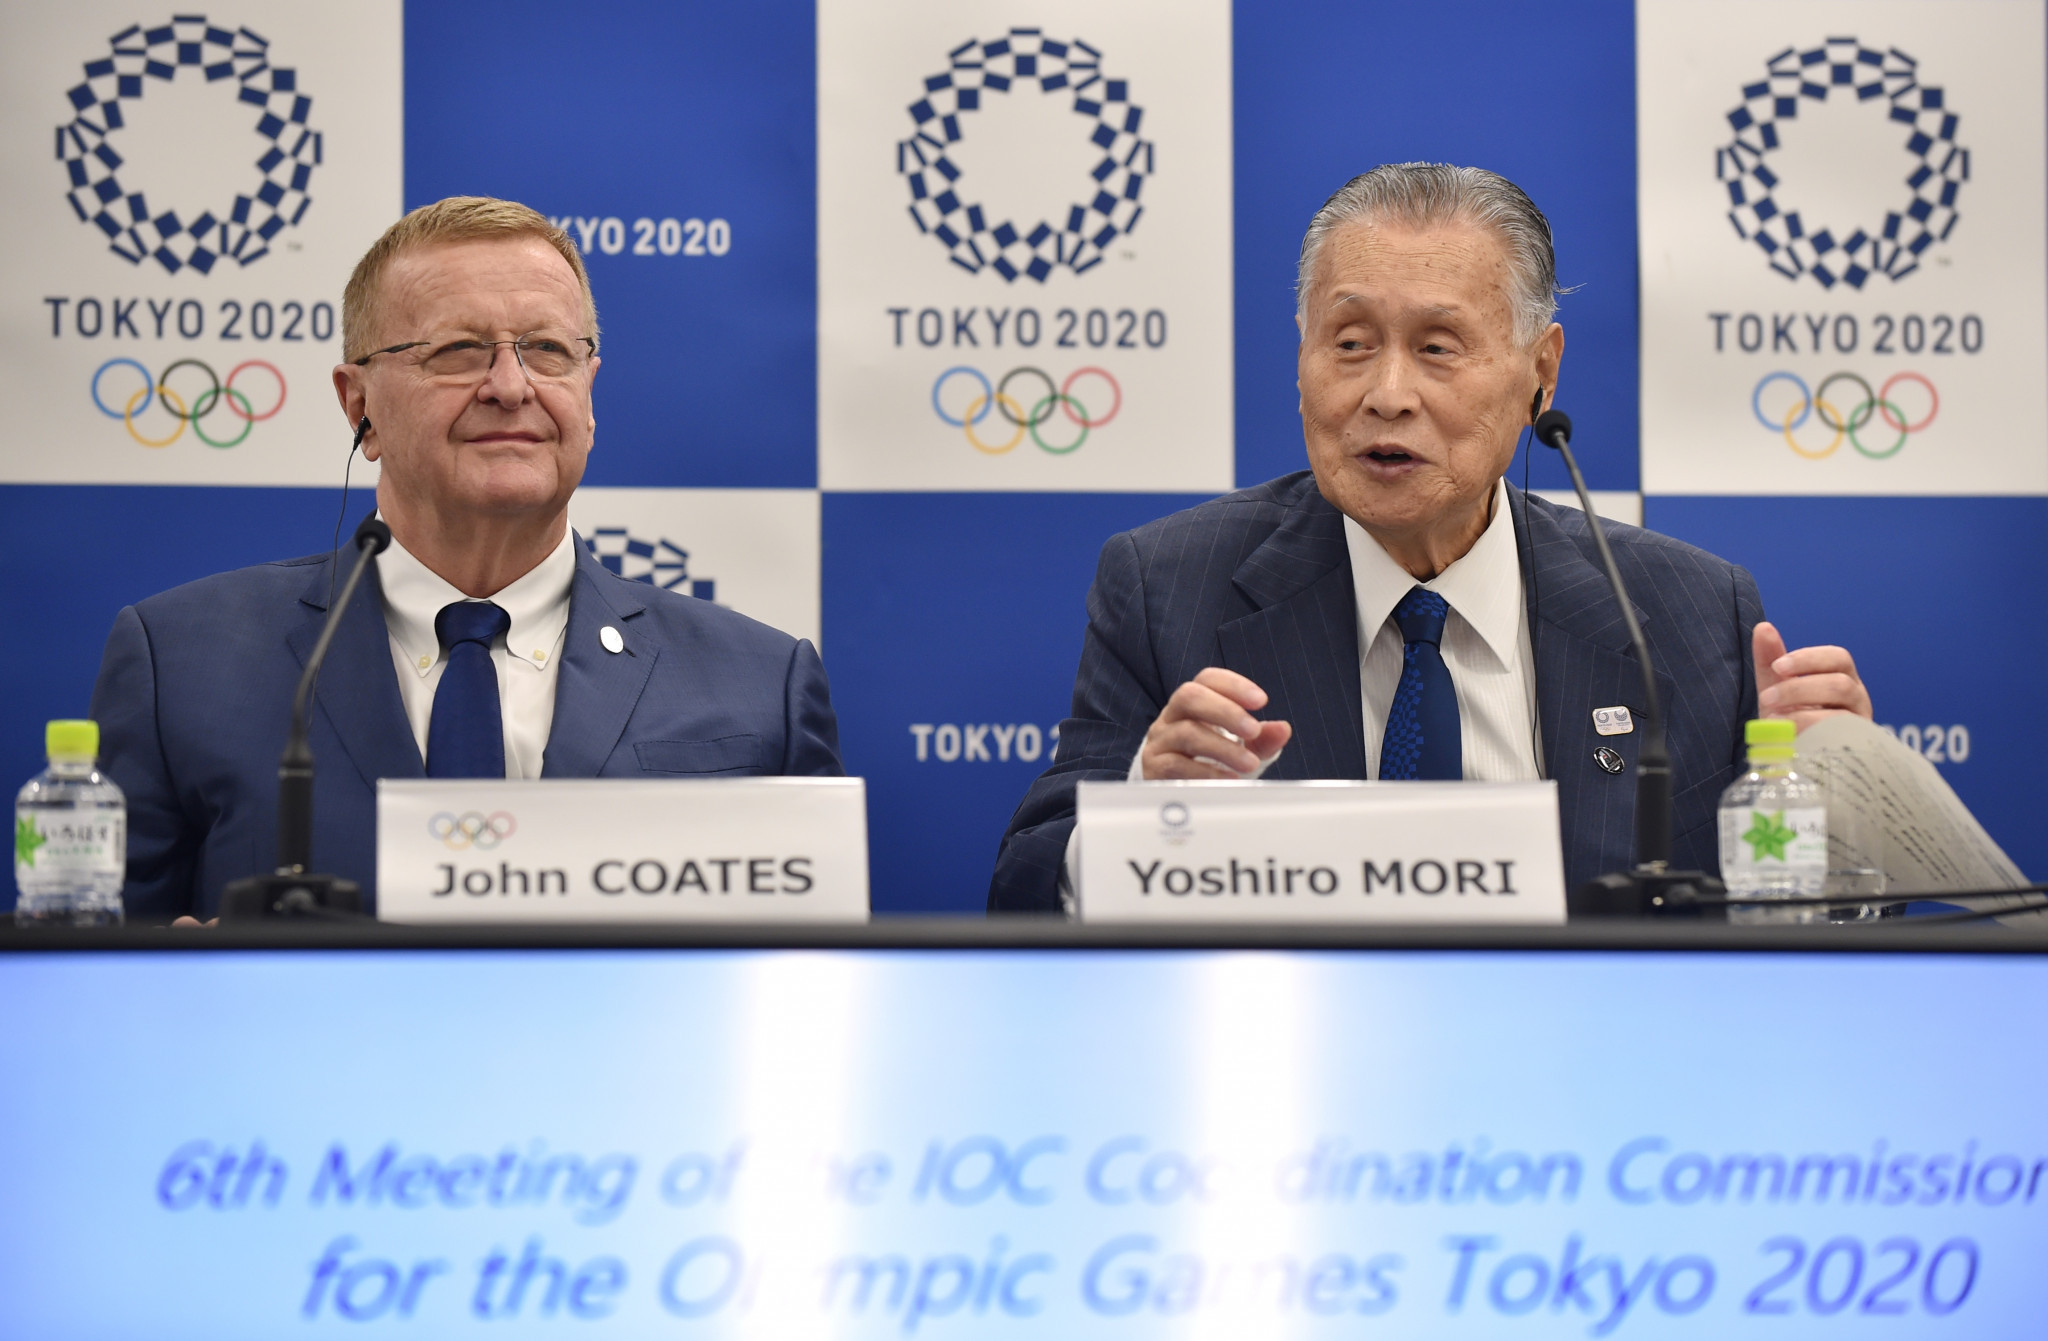 okyo 2020 President Yoshiro Mori has claimed the Olympic Torch Relay, due to start in Fukushima on March 26 in 2020, will get 